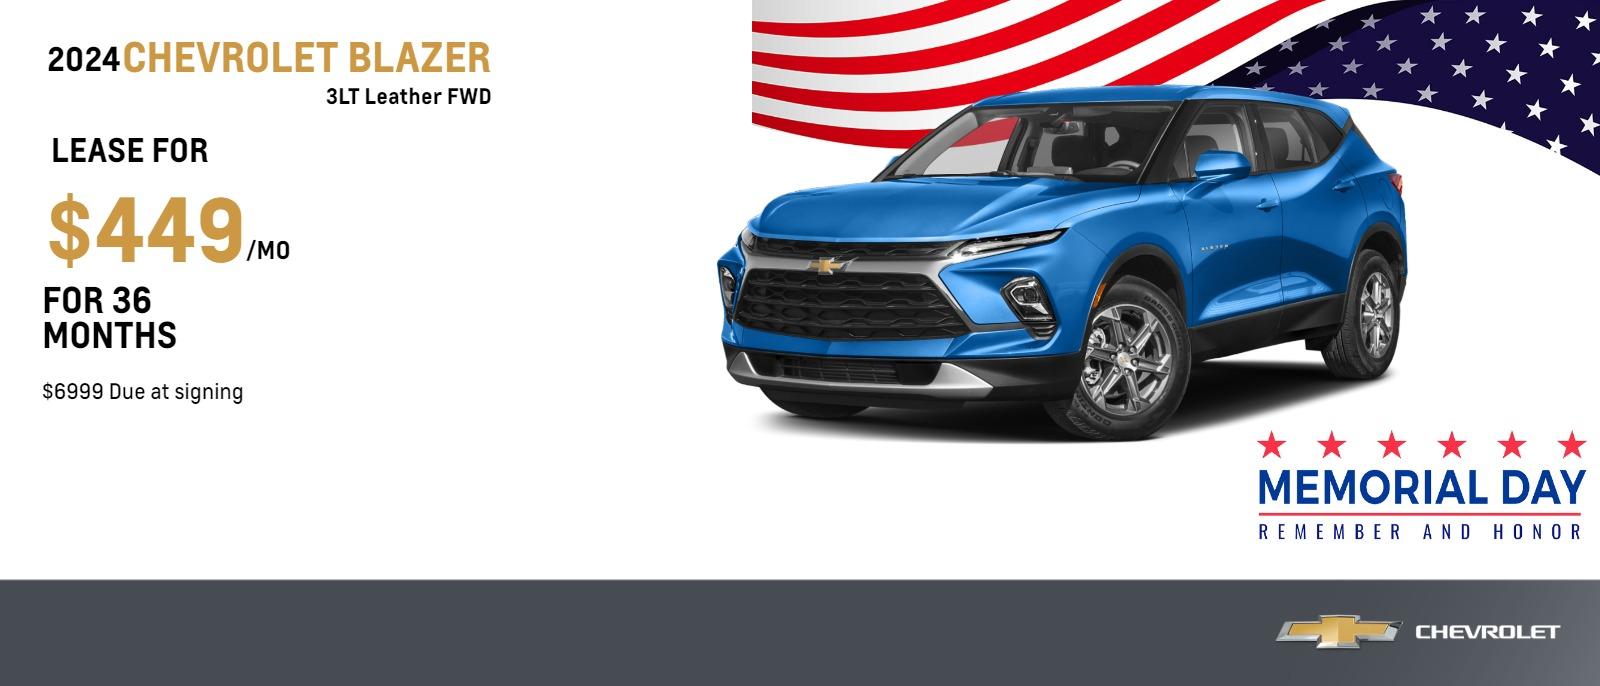 2024 Chevrolet Blazer 3LT Leather FWD
$449 Month Lease | 36 Months | $6999 Due at signing